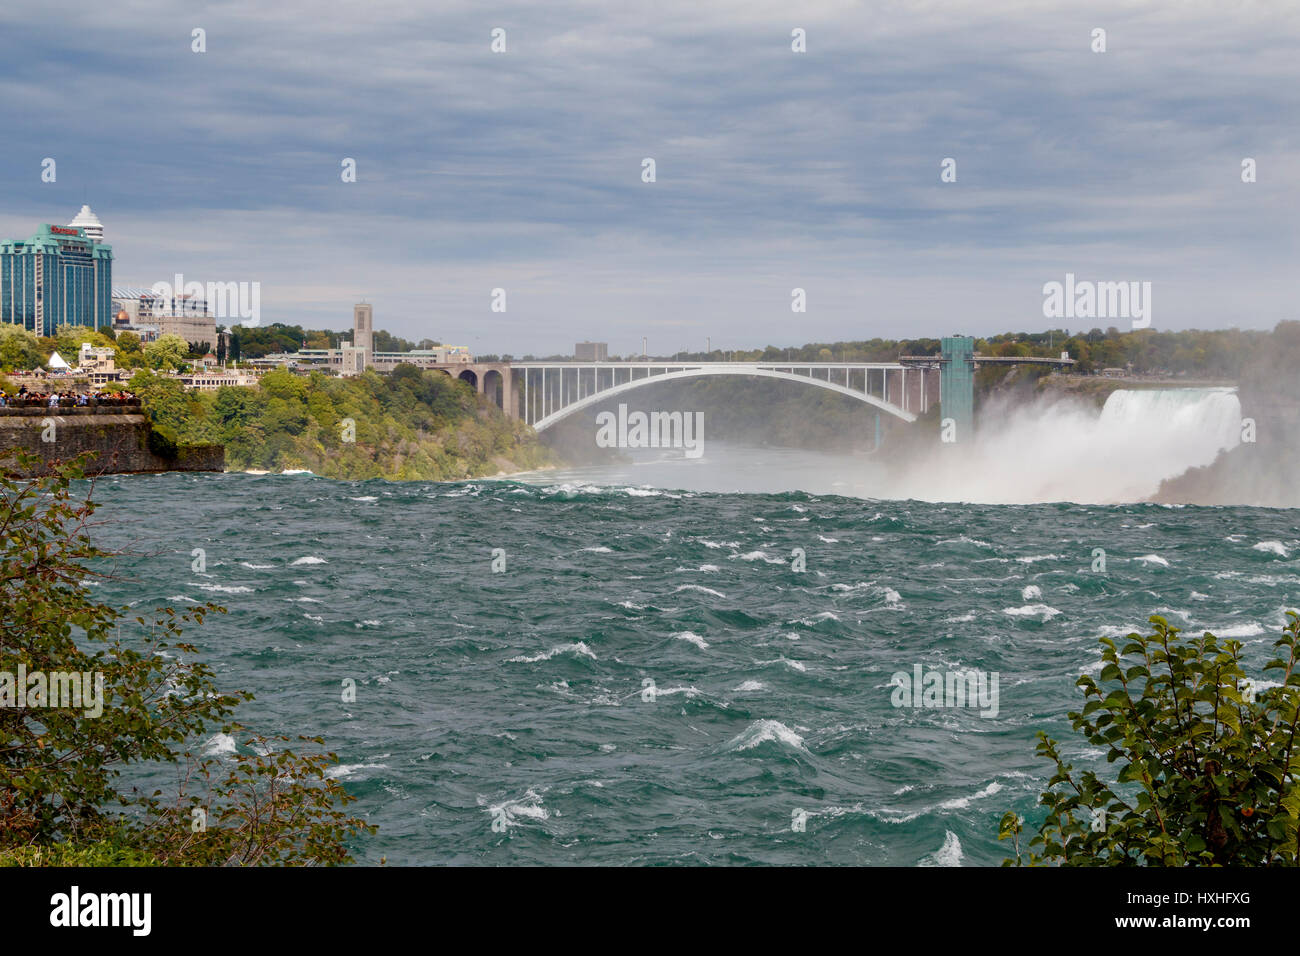 The Niagara River and American Falls with the Rainbow Bridge crossing point on the border between New York State, USA, and Ontario, Canada. Stock Photo